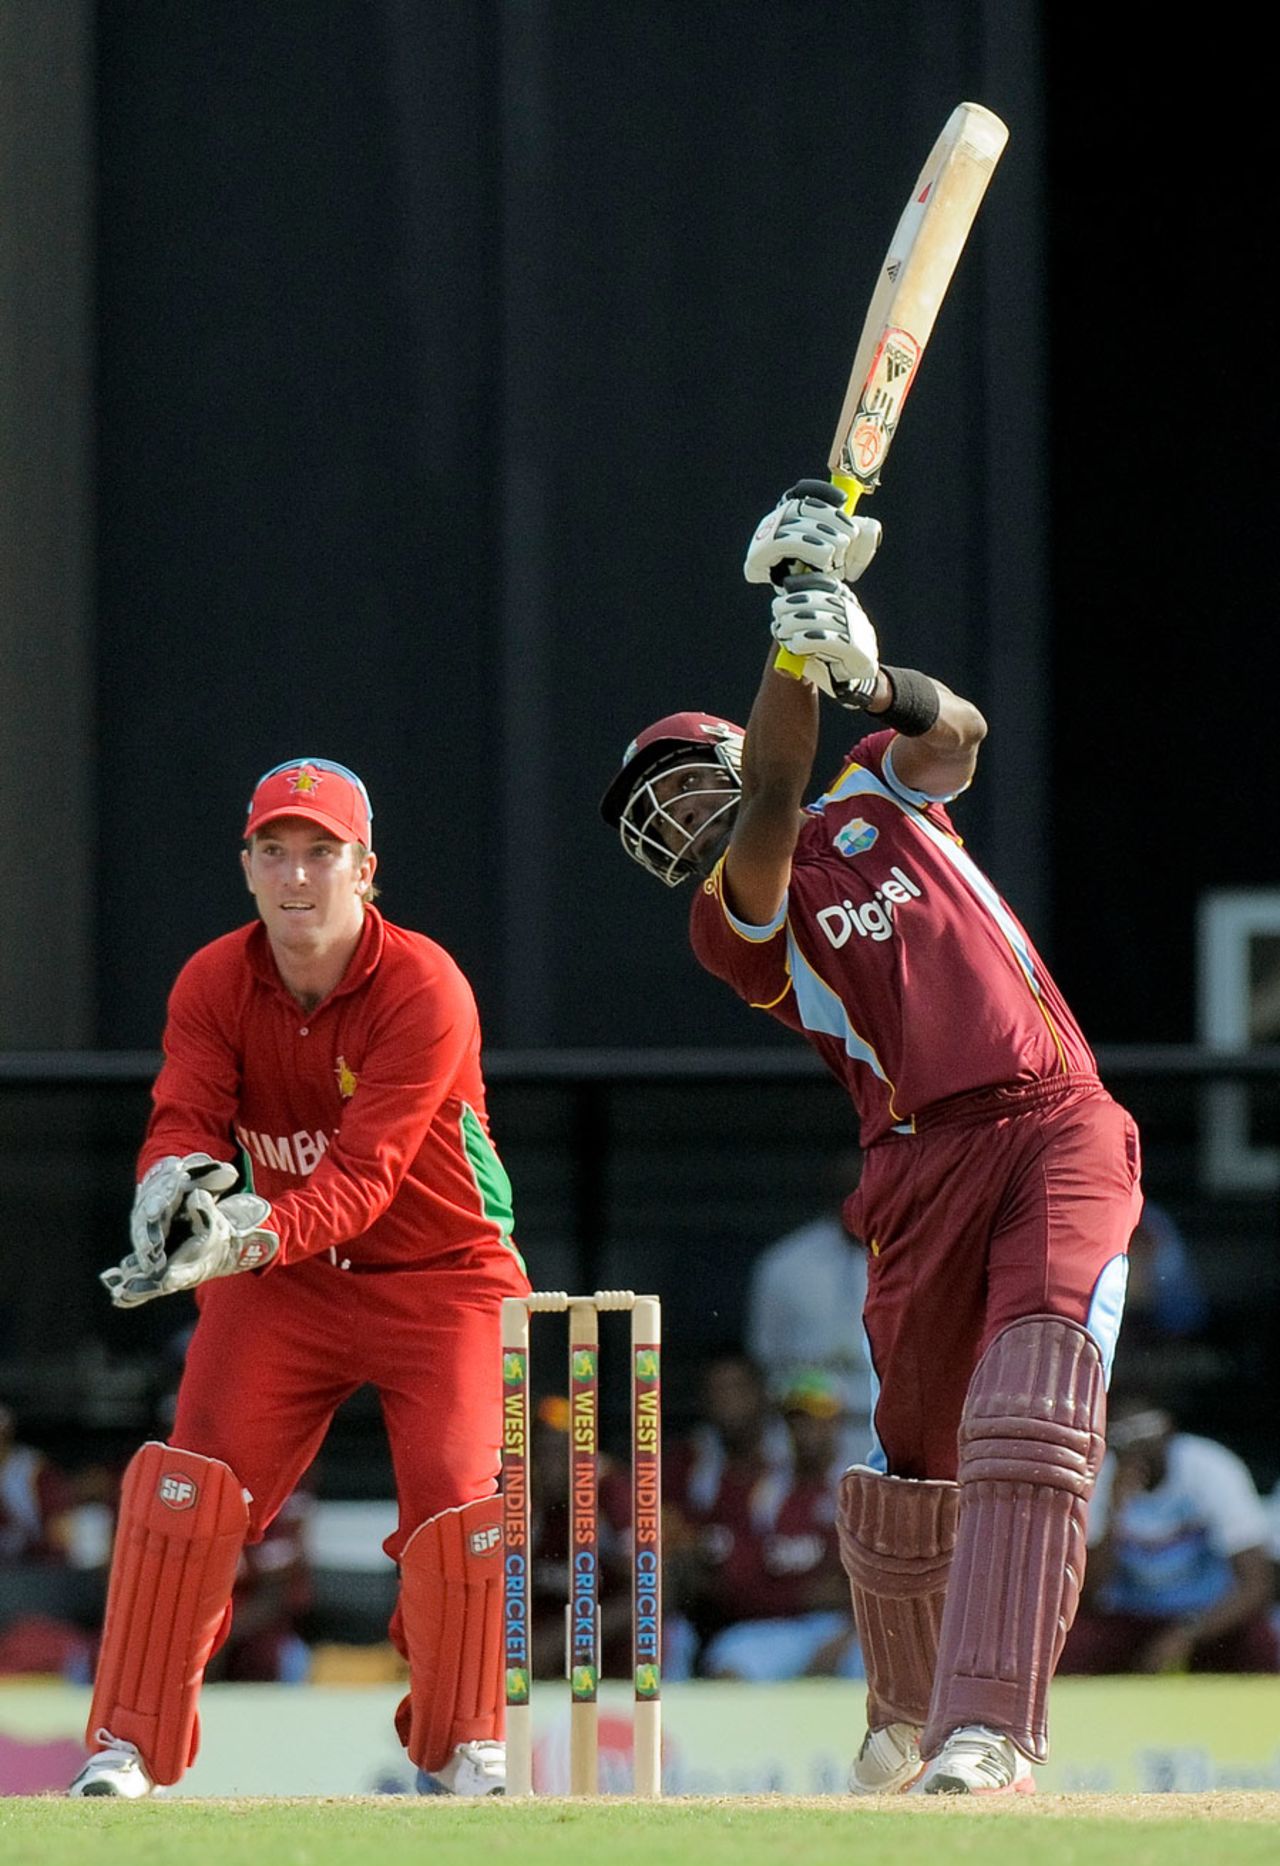 Dwayne Bravo launches one through the offside, 1st T20I, North Sound, March 2, 2013